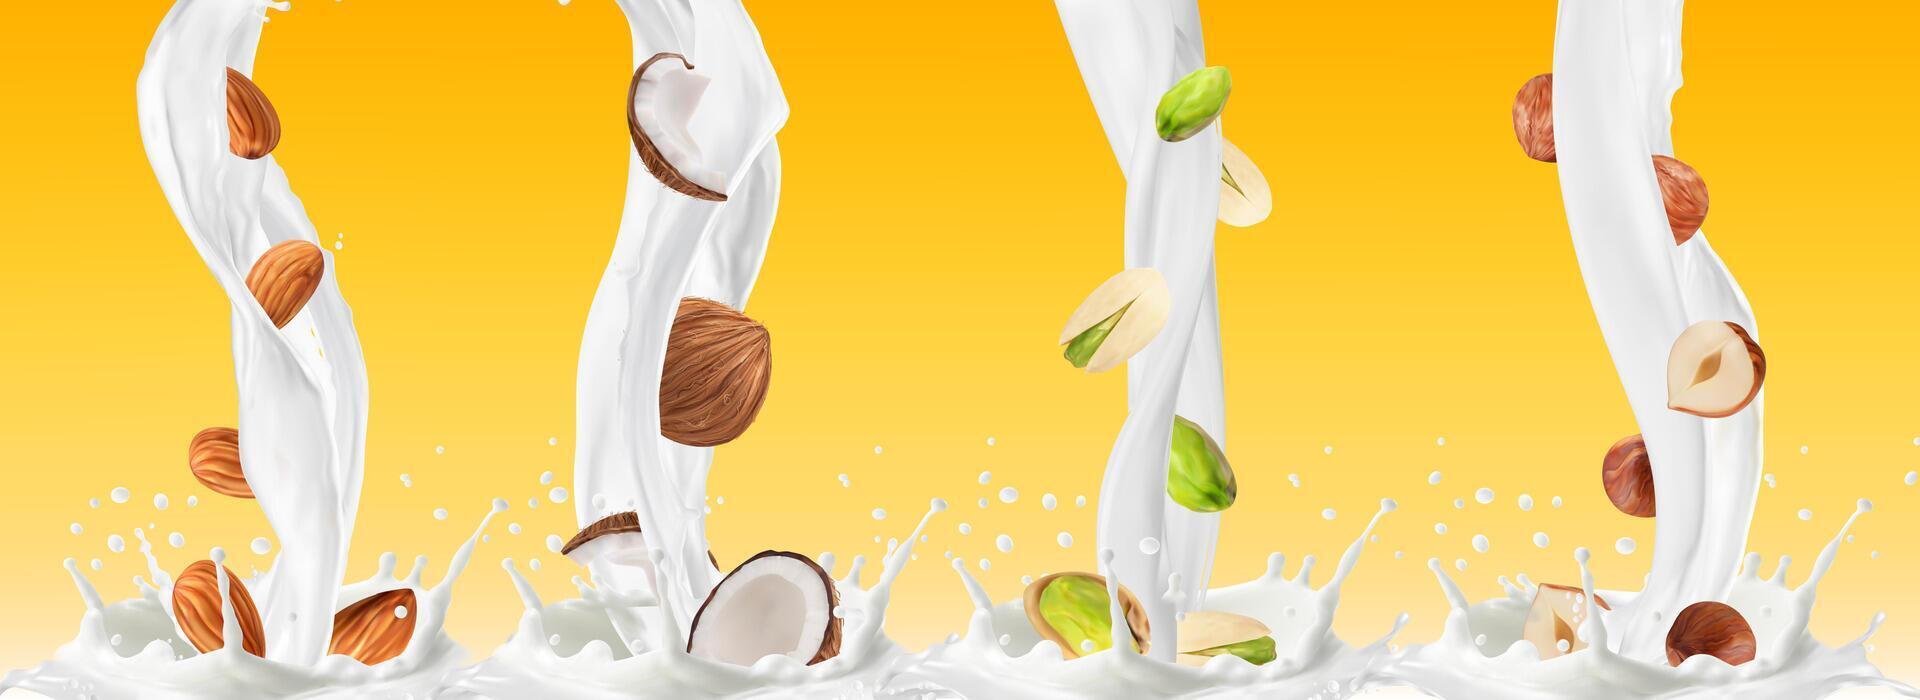 Realistic nut milk flow and splashes, 3d vector